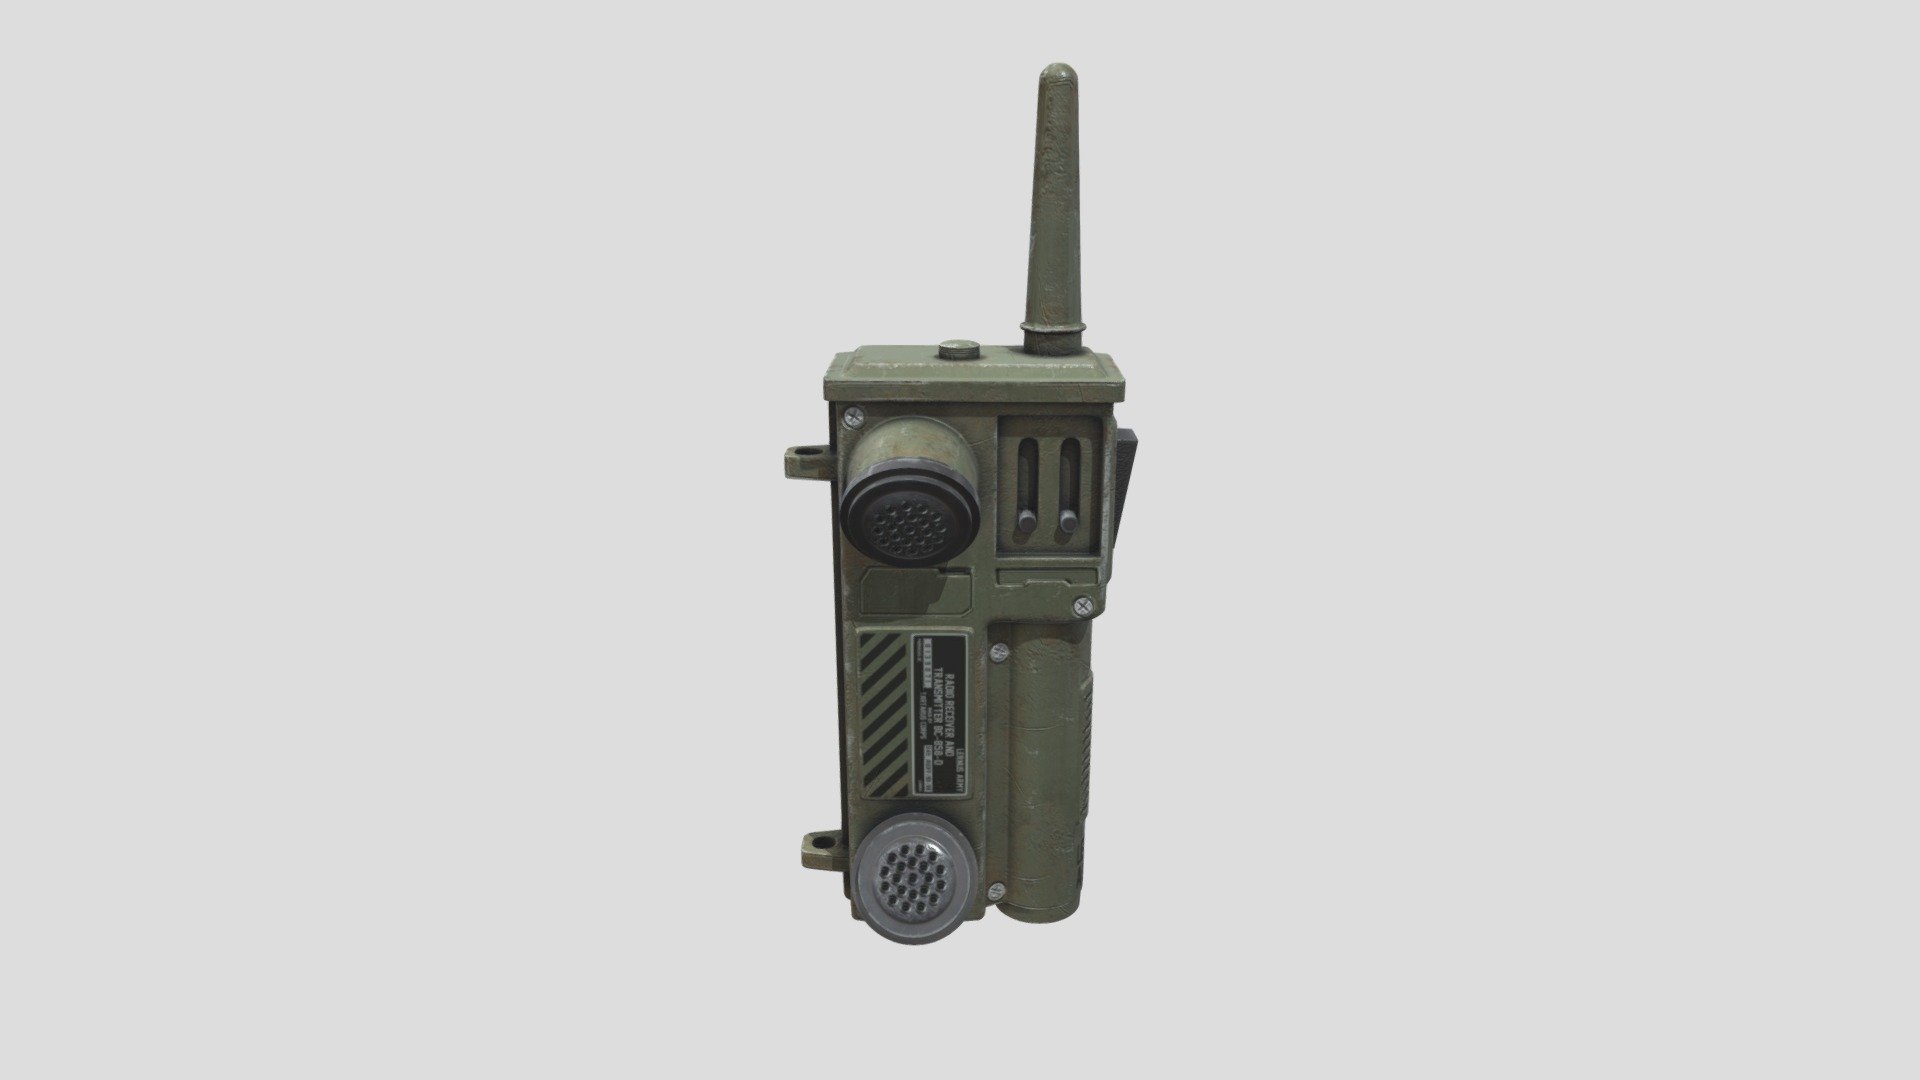 Inspired by old and vintage amry walkies and phone fields.

Designed for a personal rpg dystopia project 3d model